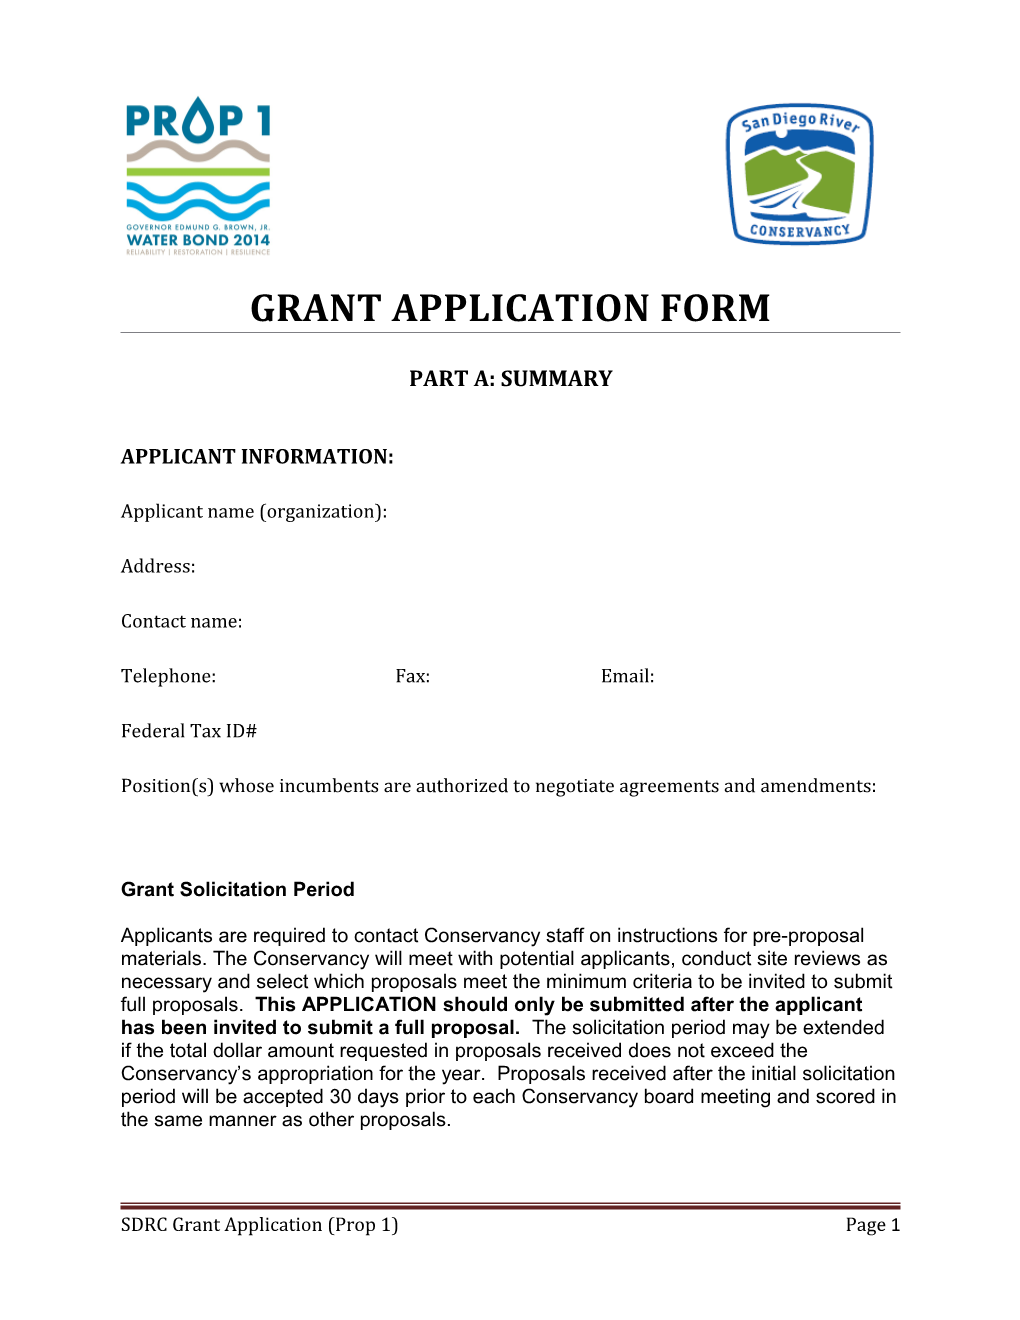 Grant Application Form s1